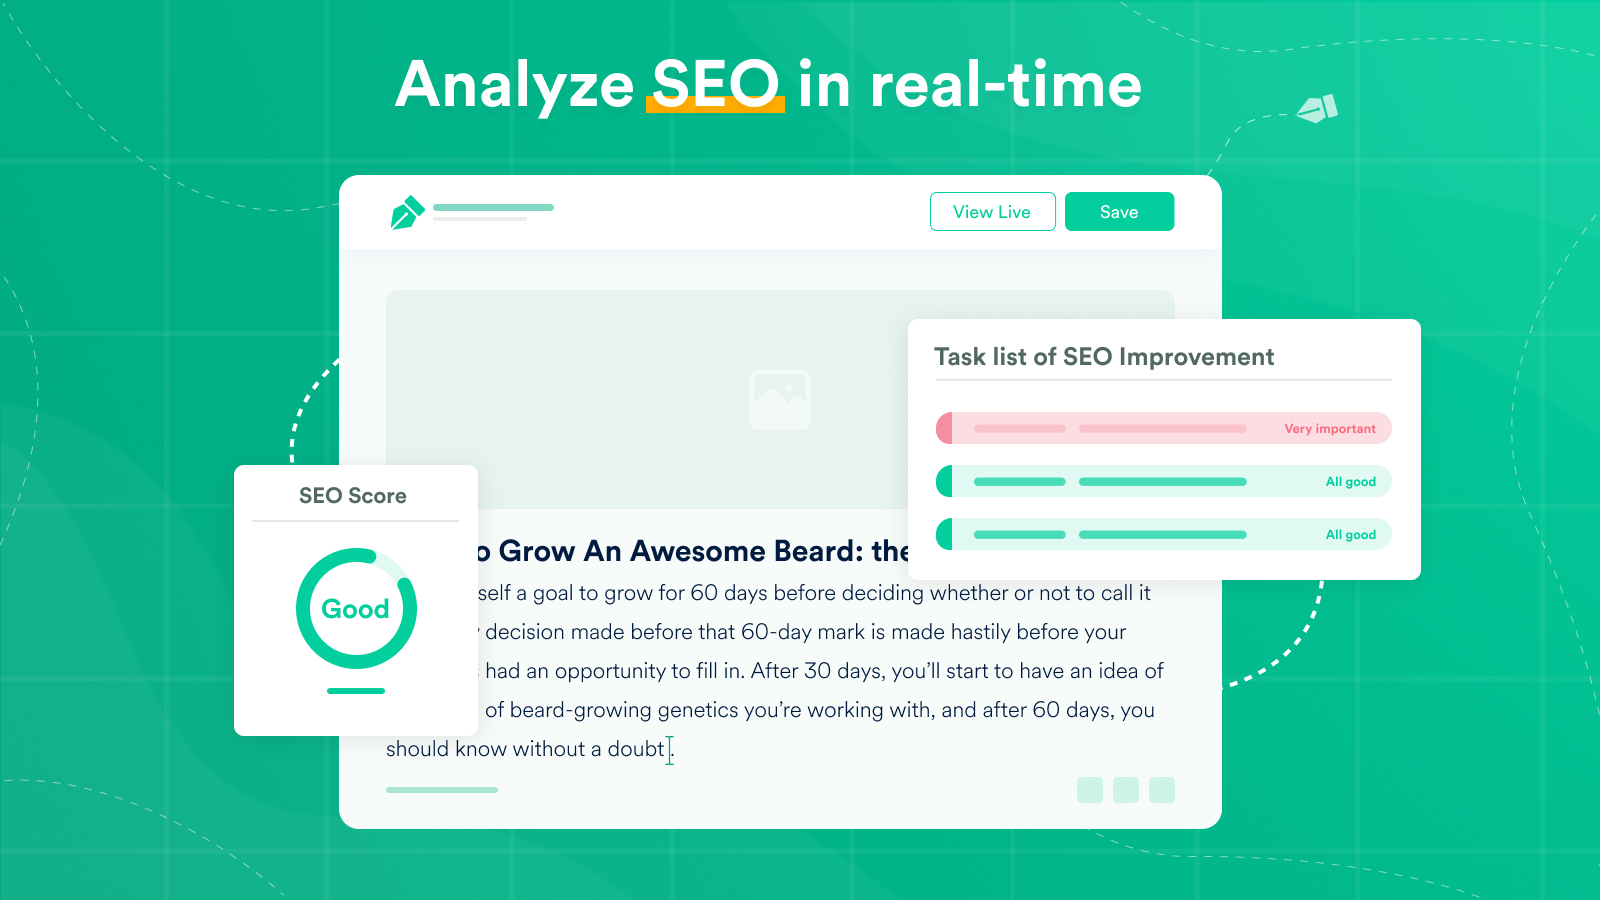 Analyze SEO in real-time